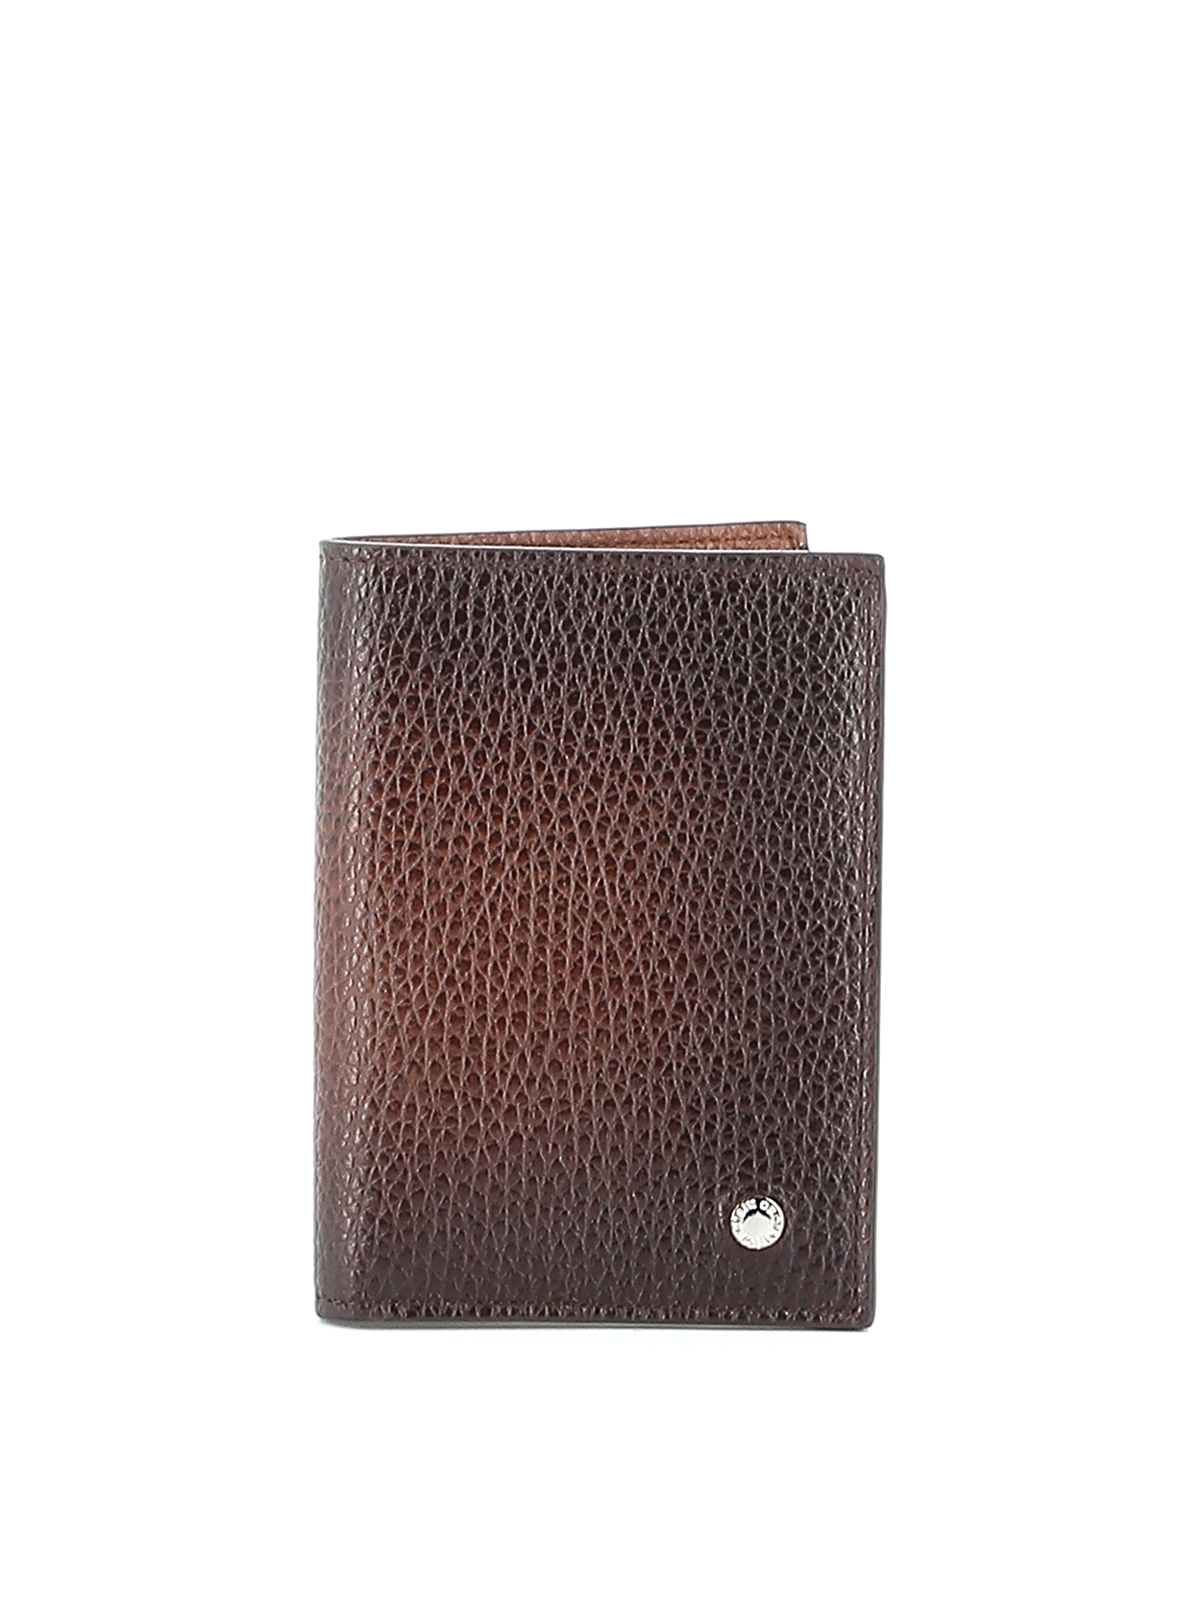 Orciani Micron Deep Gradient Leather Wallet In Brown